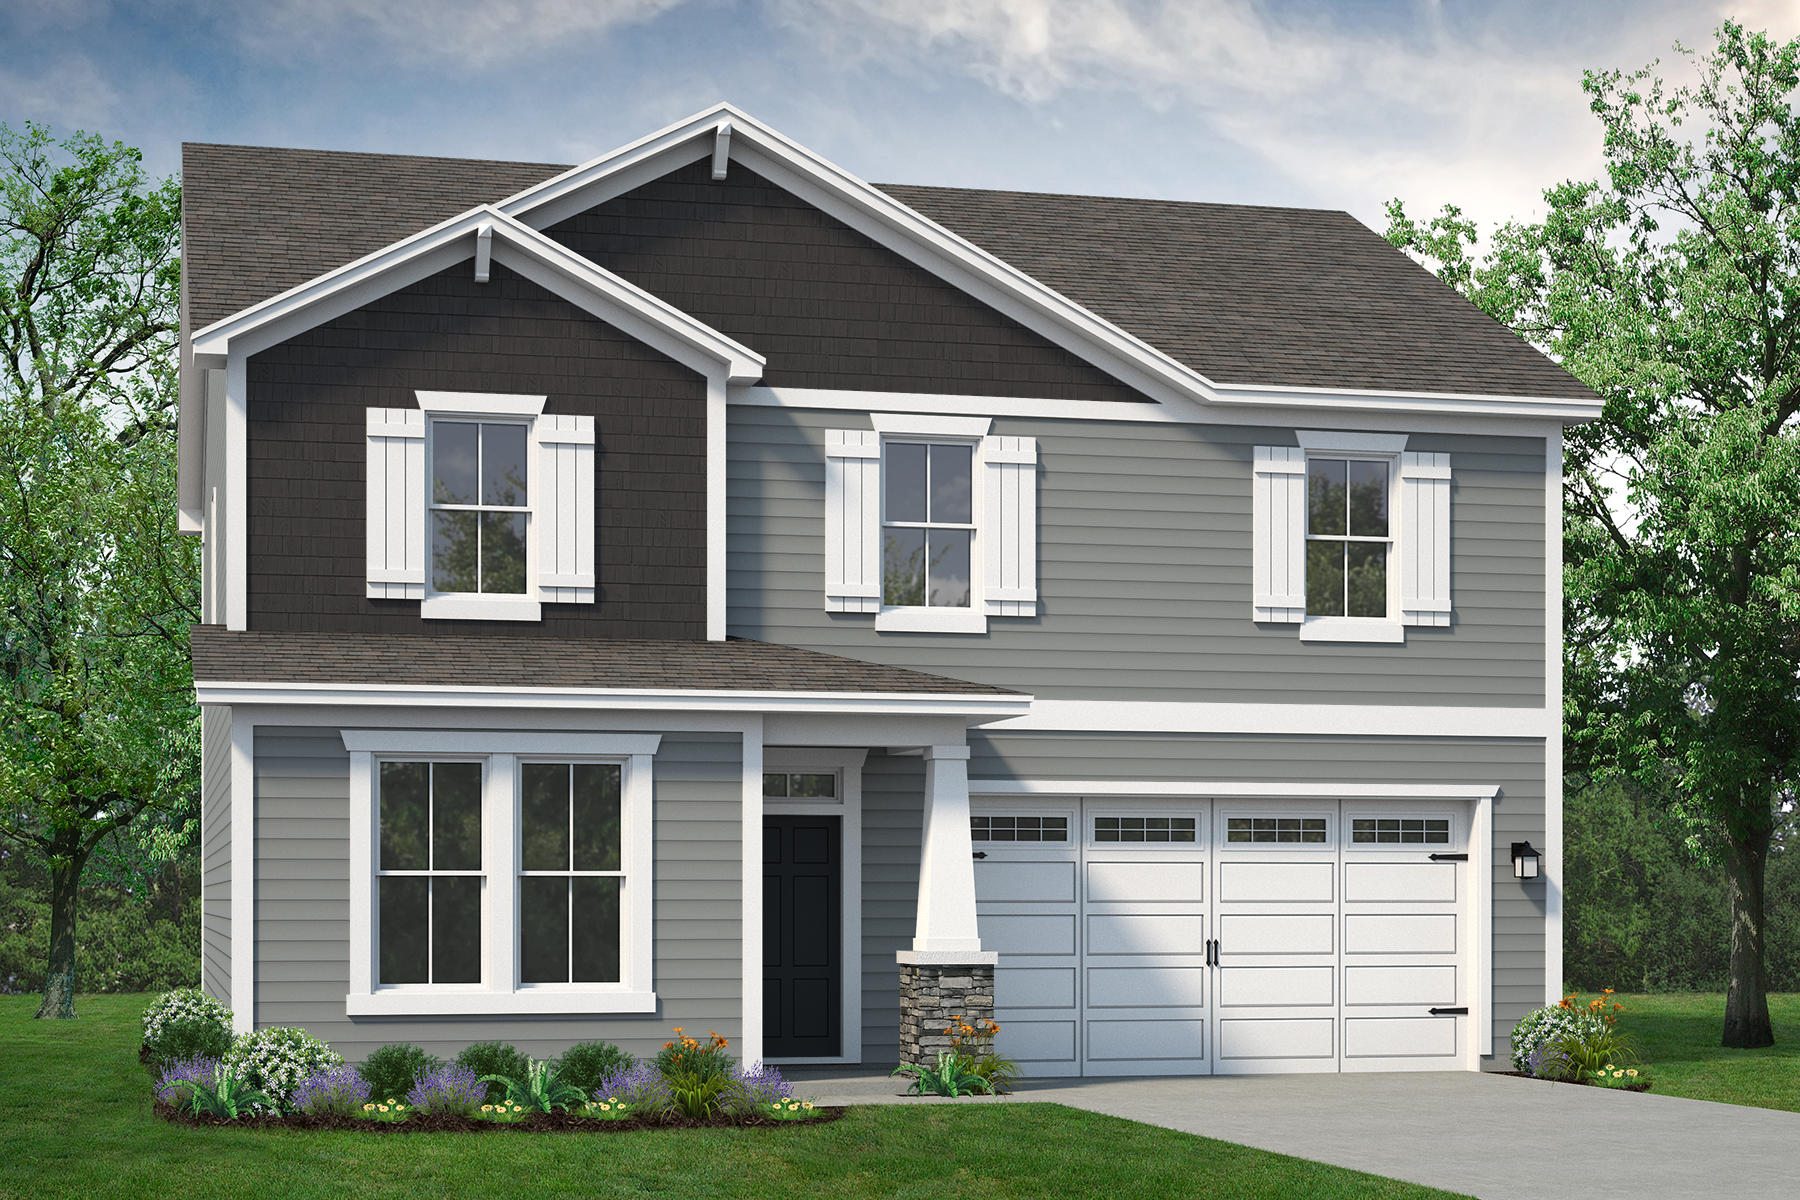 Elevation A. 2,427sf New Home in Angier, NC